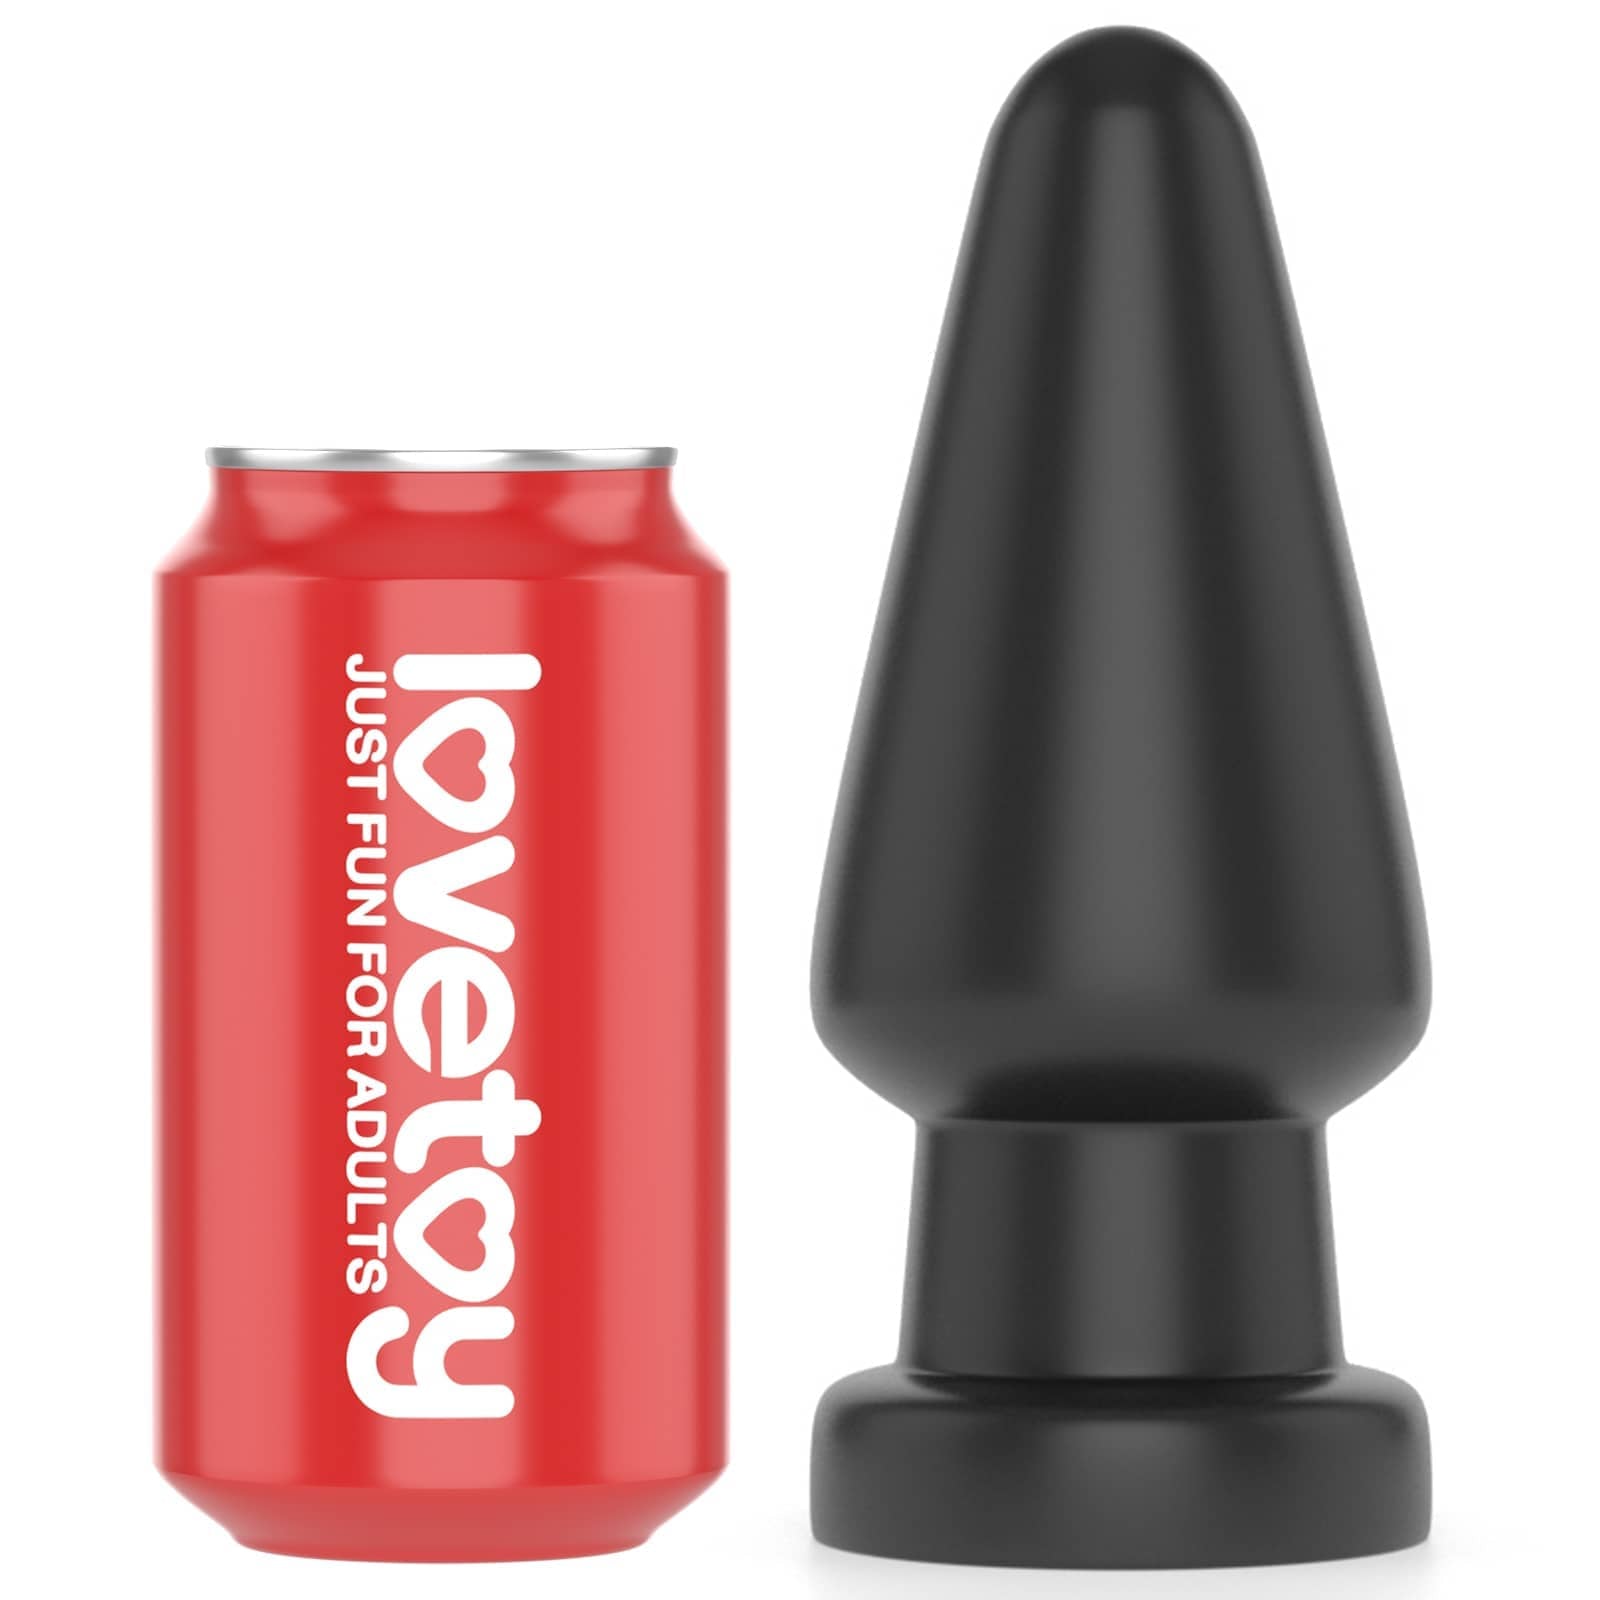 Comparison between the 7 inches anal shocker large butt plug  and beverage cans